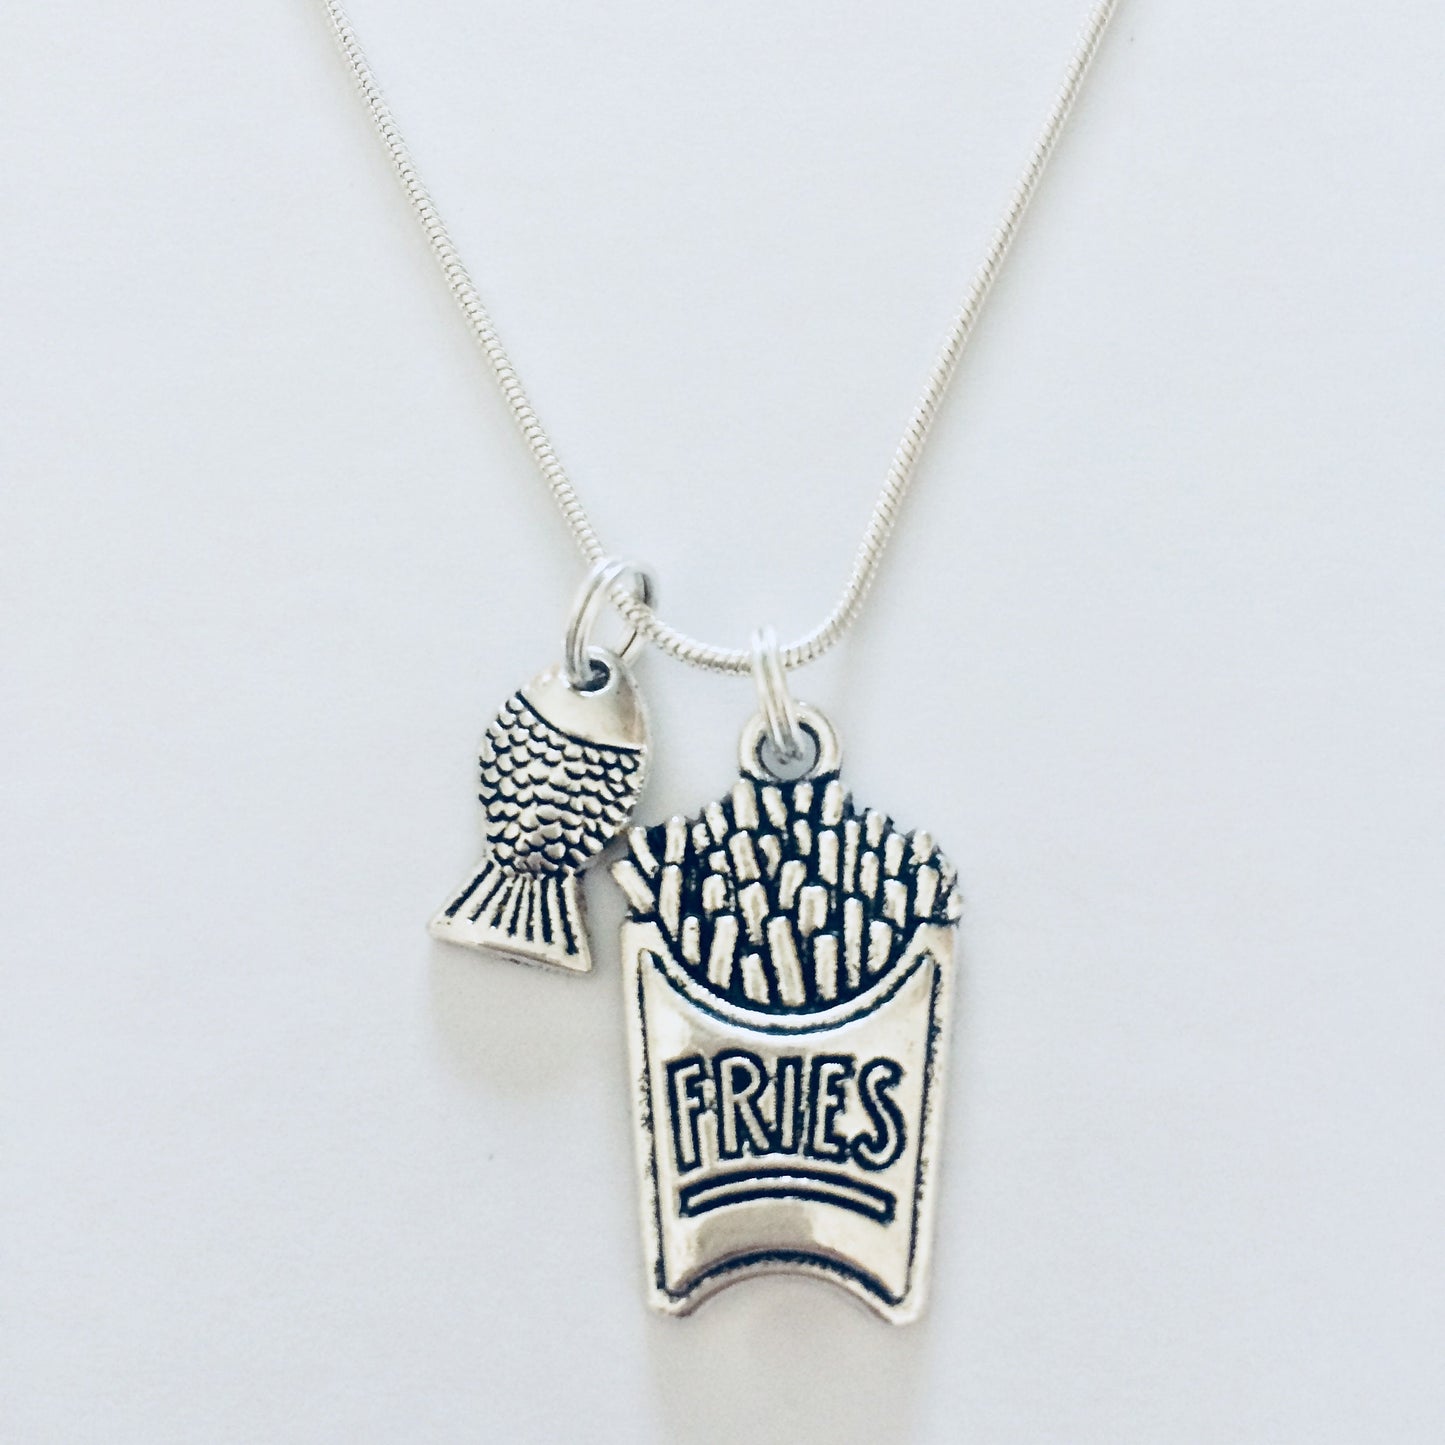 Beach Necklace, Fish Chips Gifts, Fish Chips Lover, Cute Necklace, Cute Gift Ideas, Gifts For Friends, School Friend Gift, Fries Necklace.